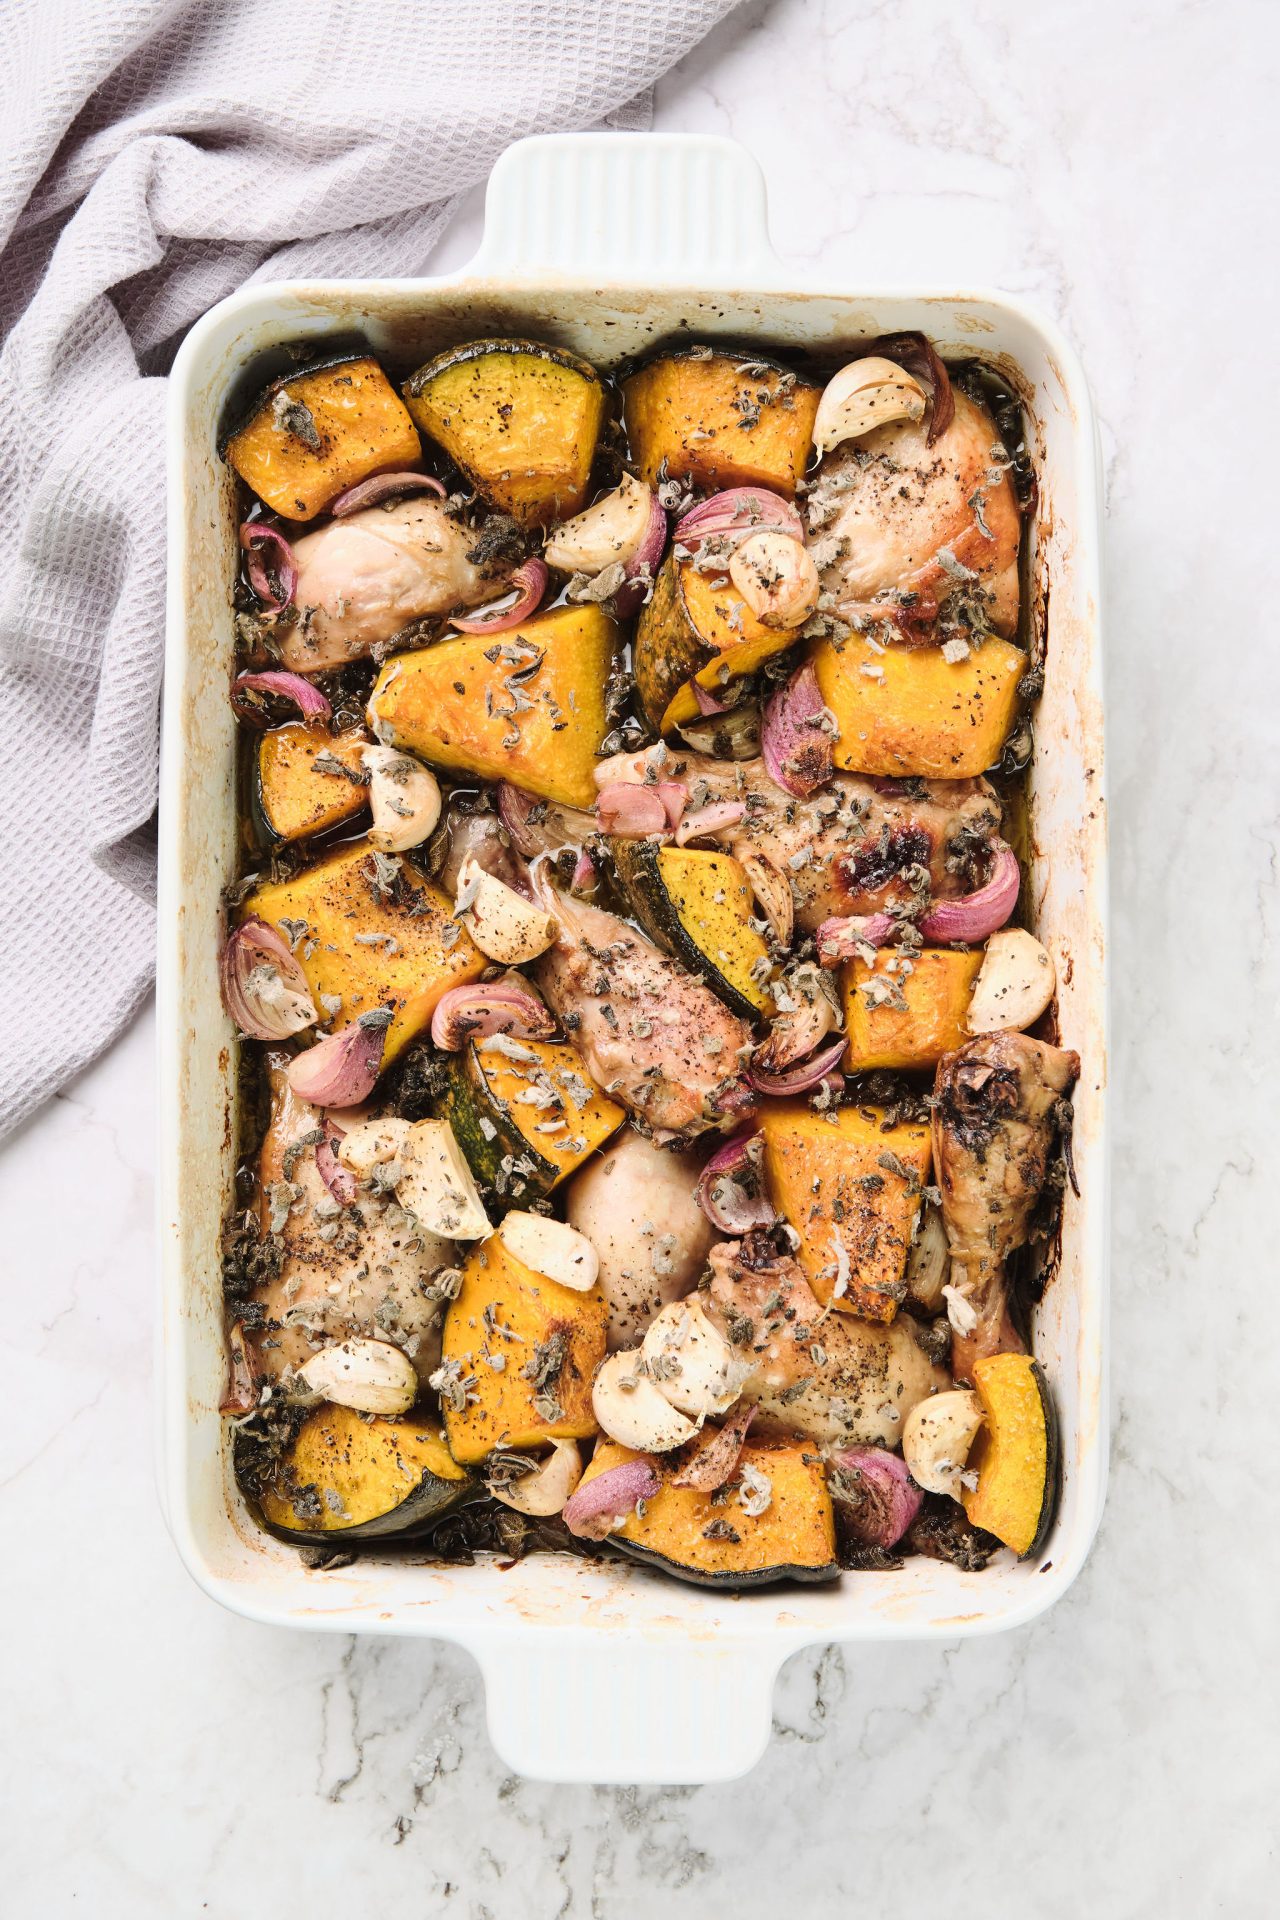 Roasted chicken in a white baking dish with pumpkin, onion and herbs